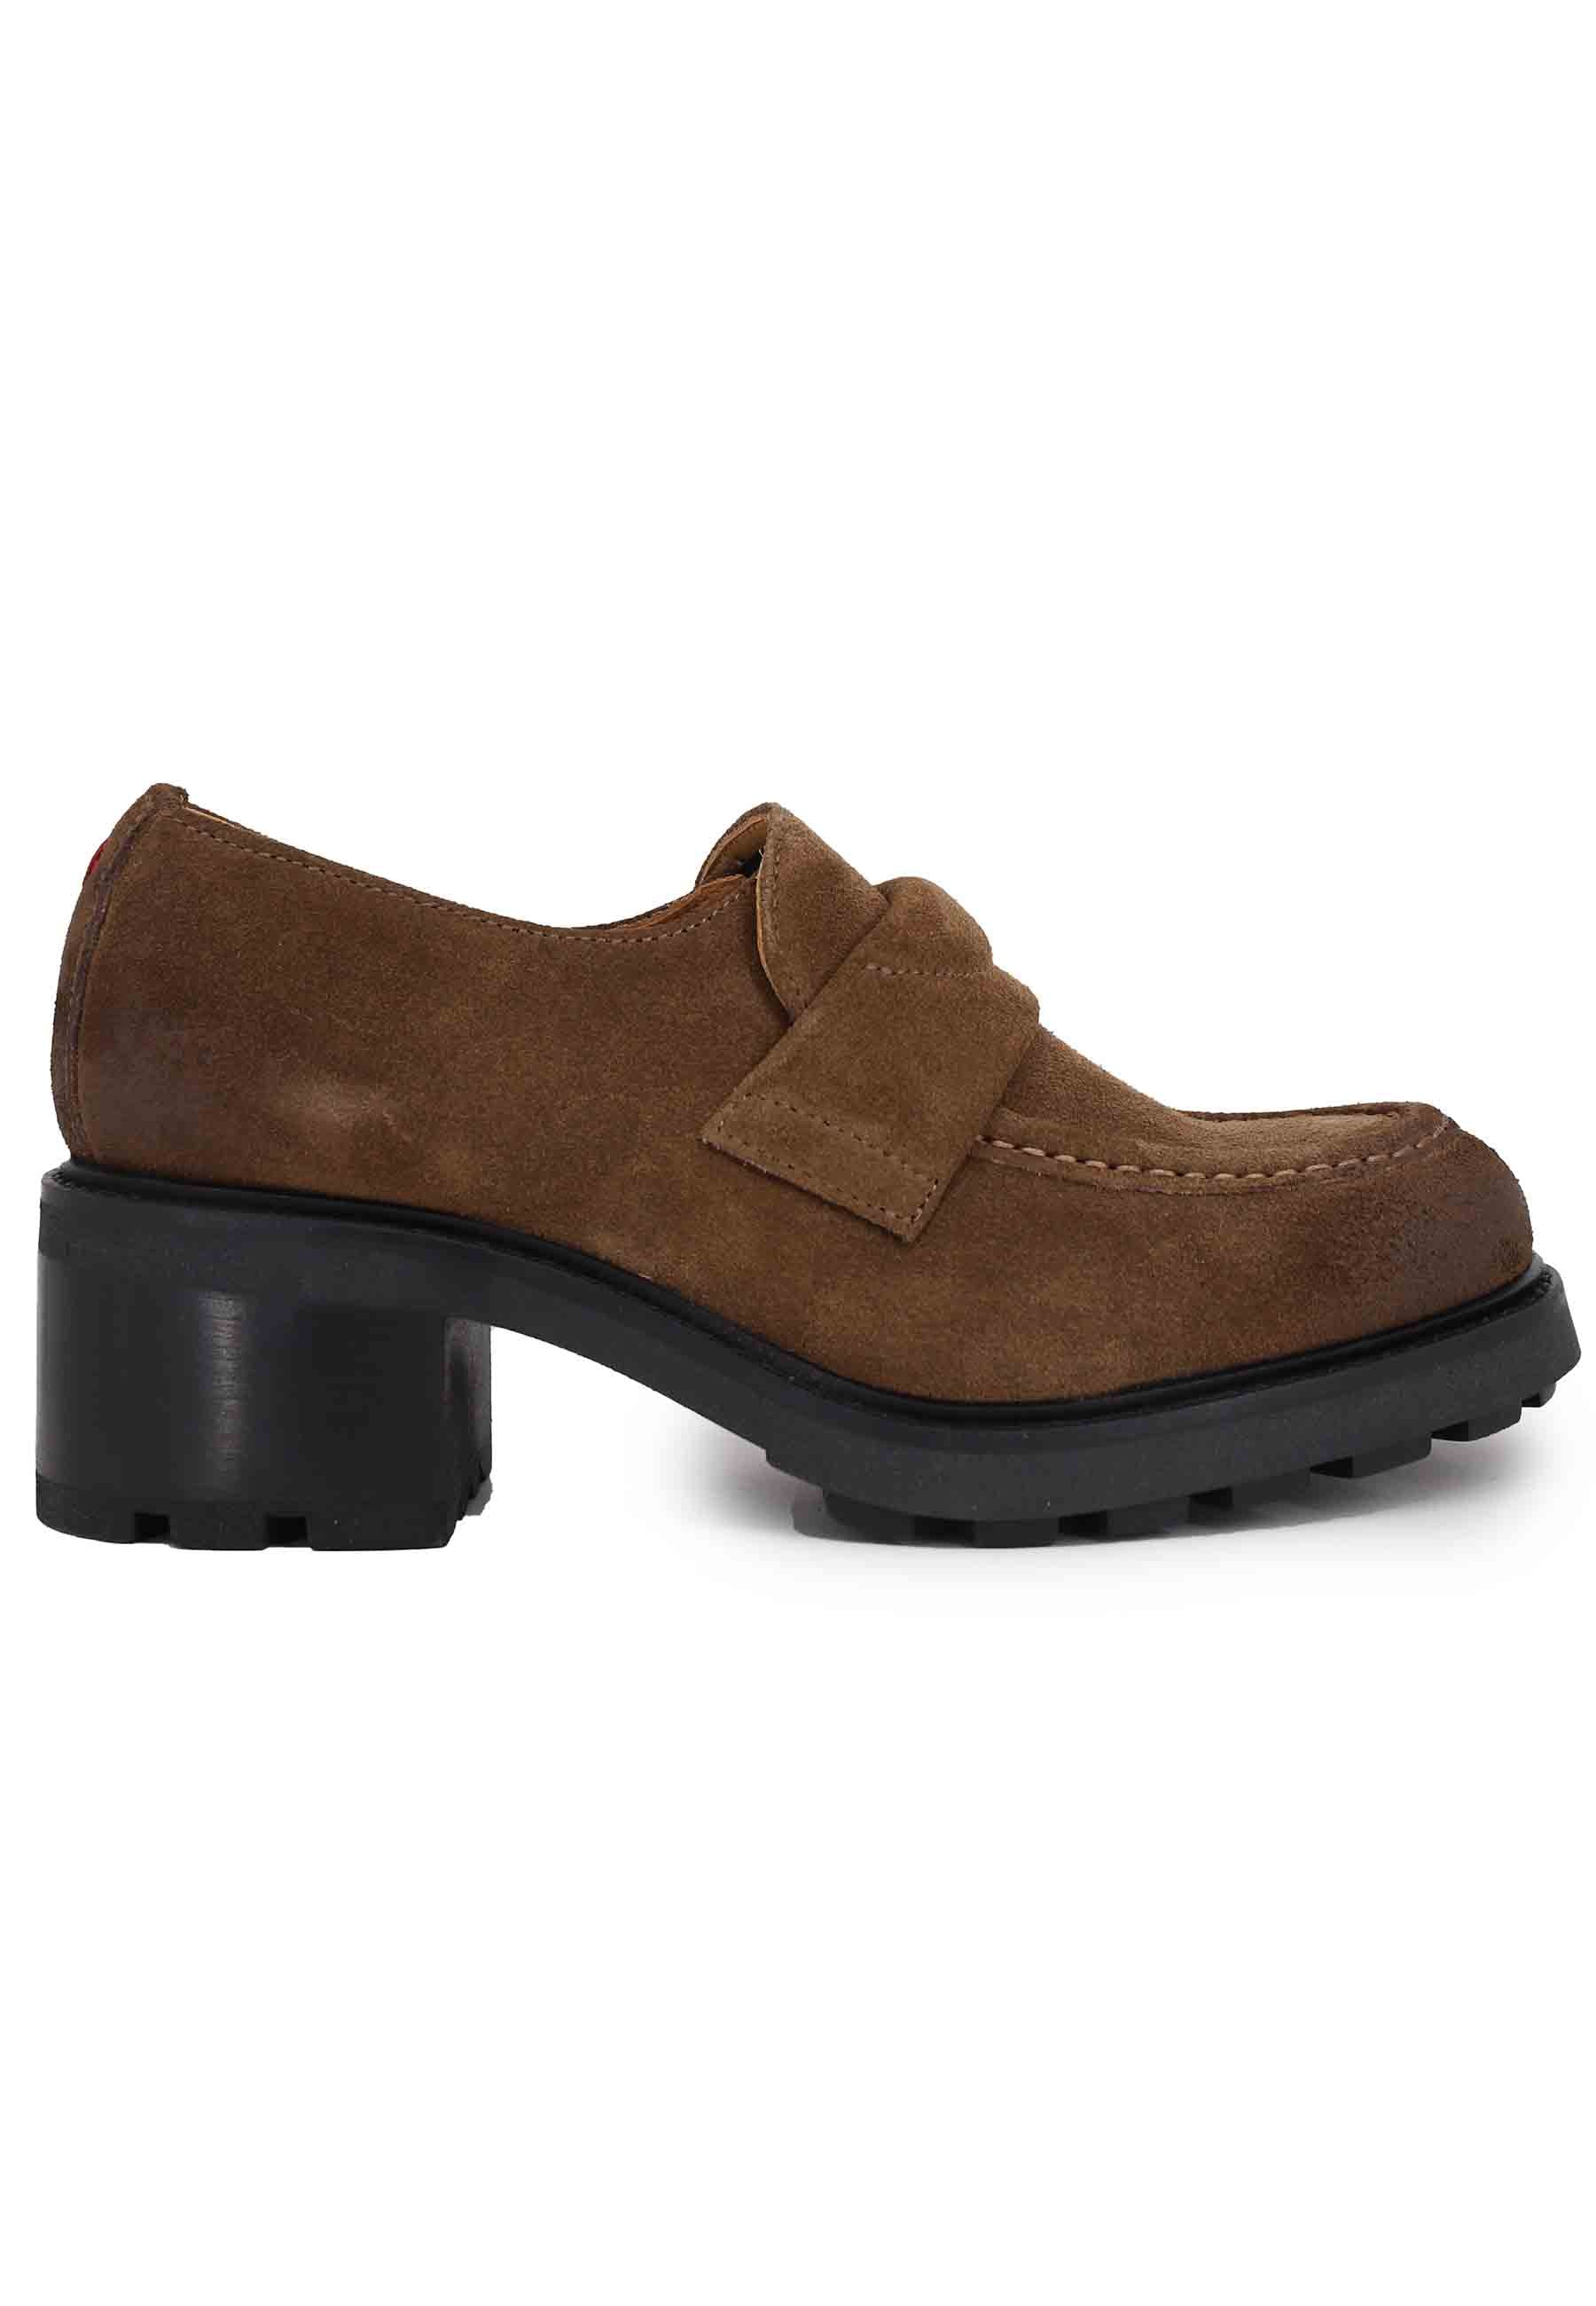 Women's moccasins in brown suede with lug sole